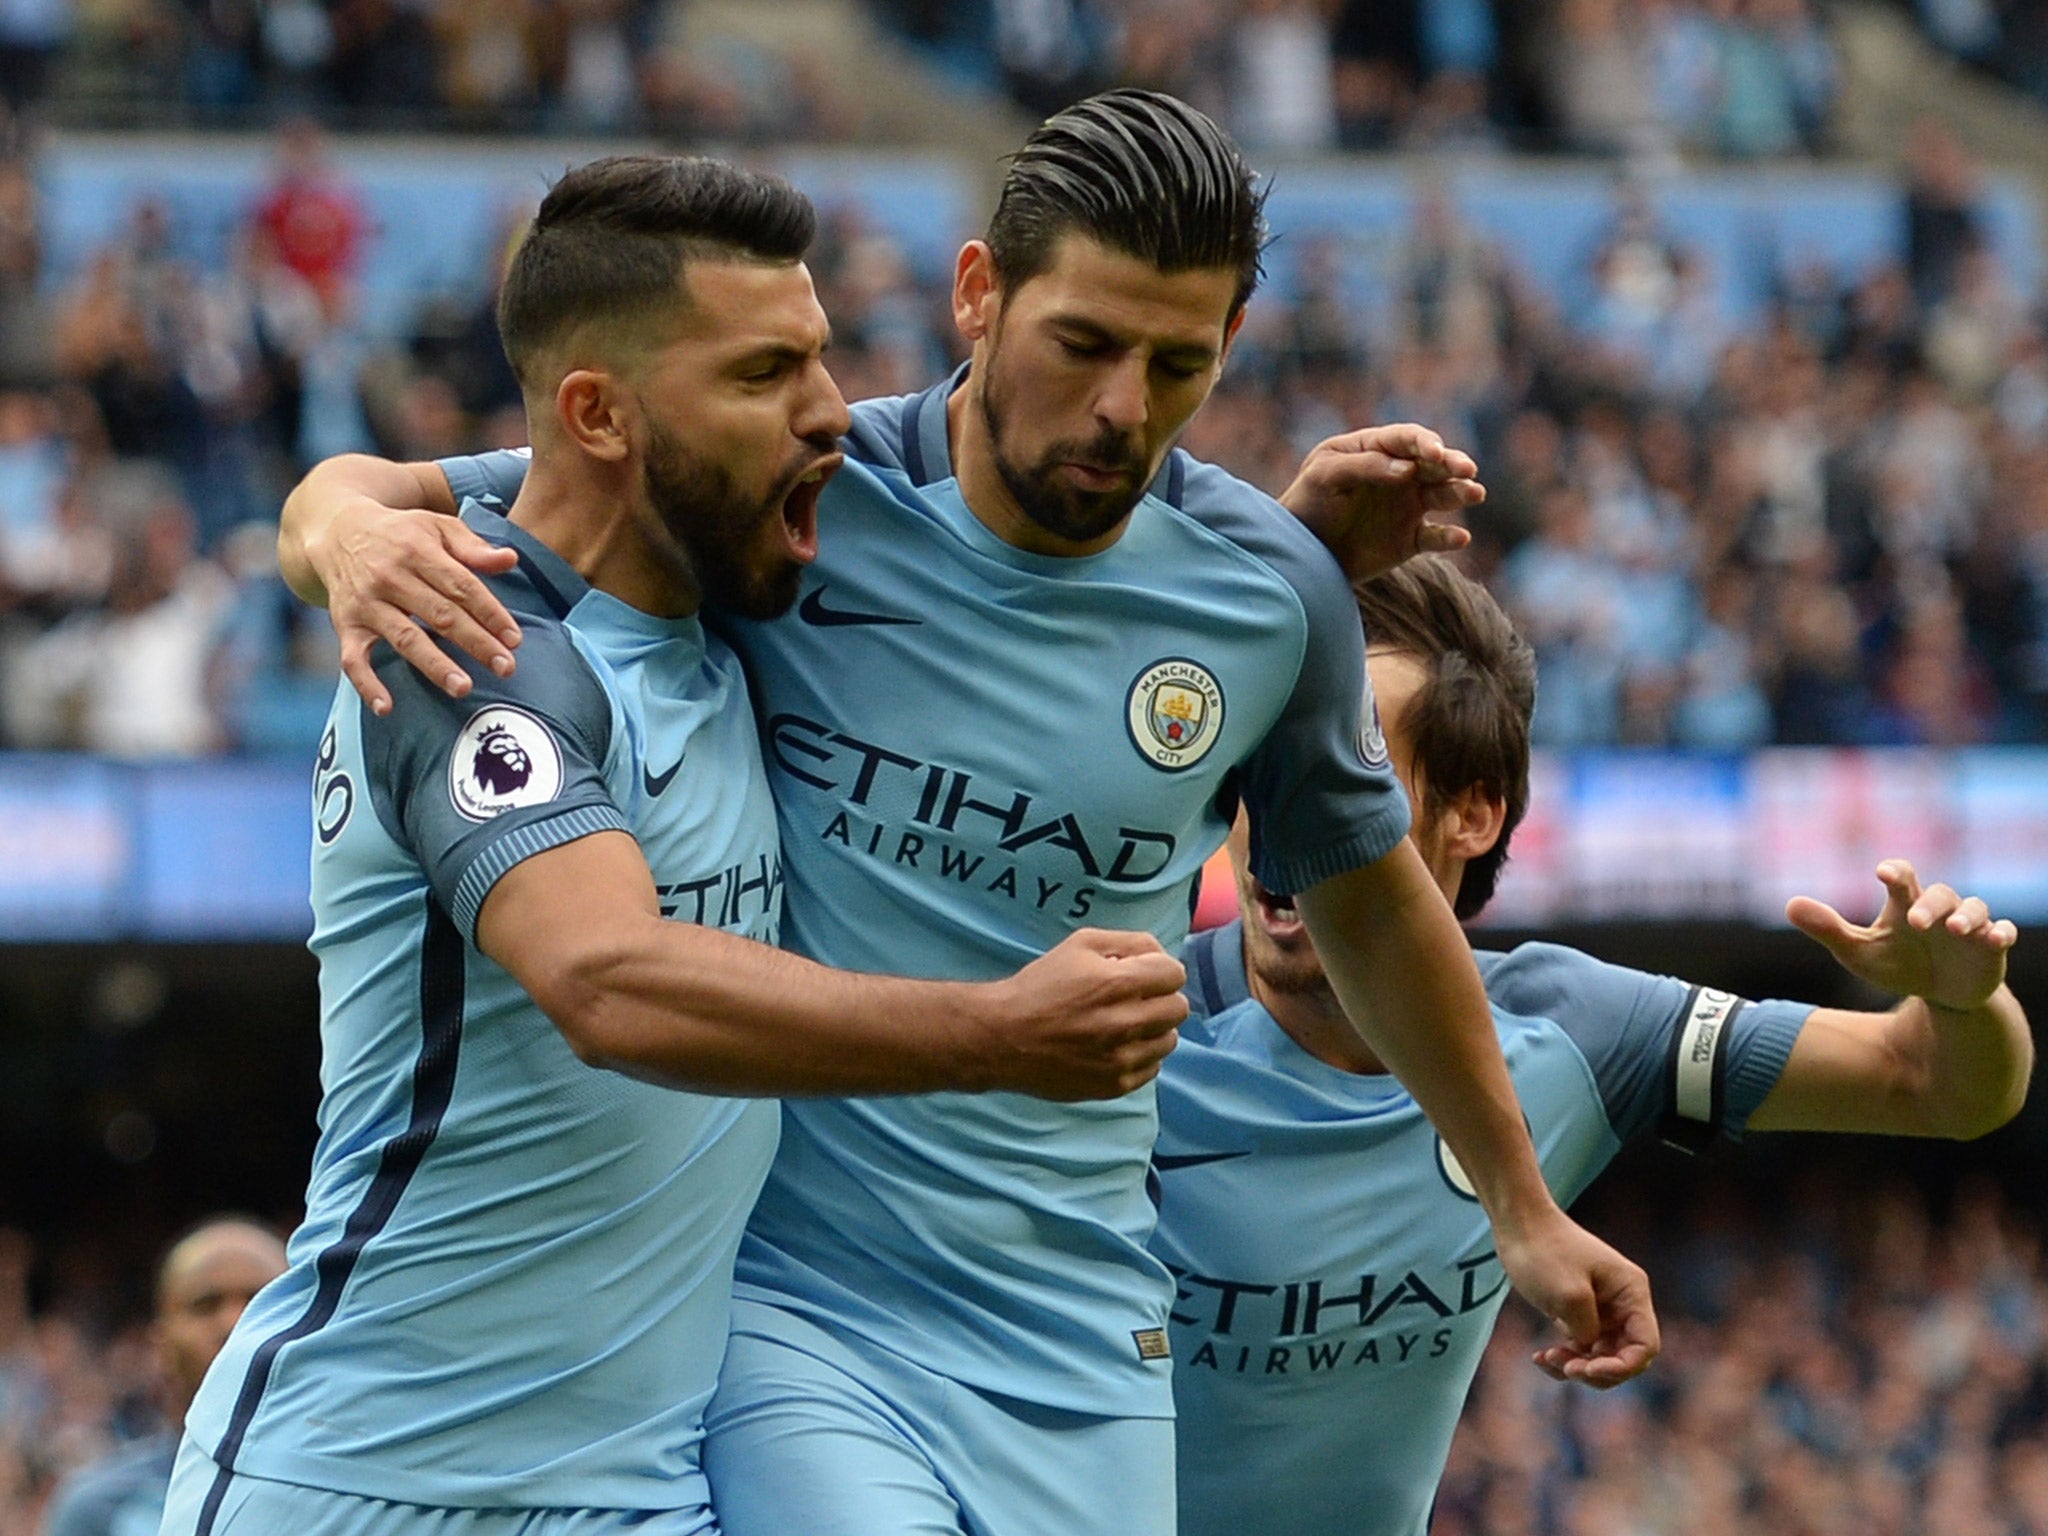 Sergio Aguero celebrates with Nolito after scoring a penalty against Sunderland